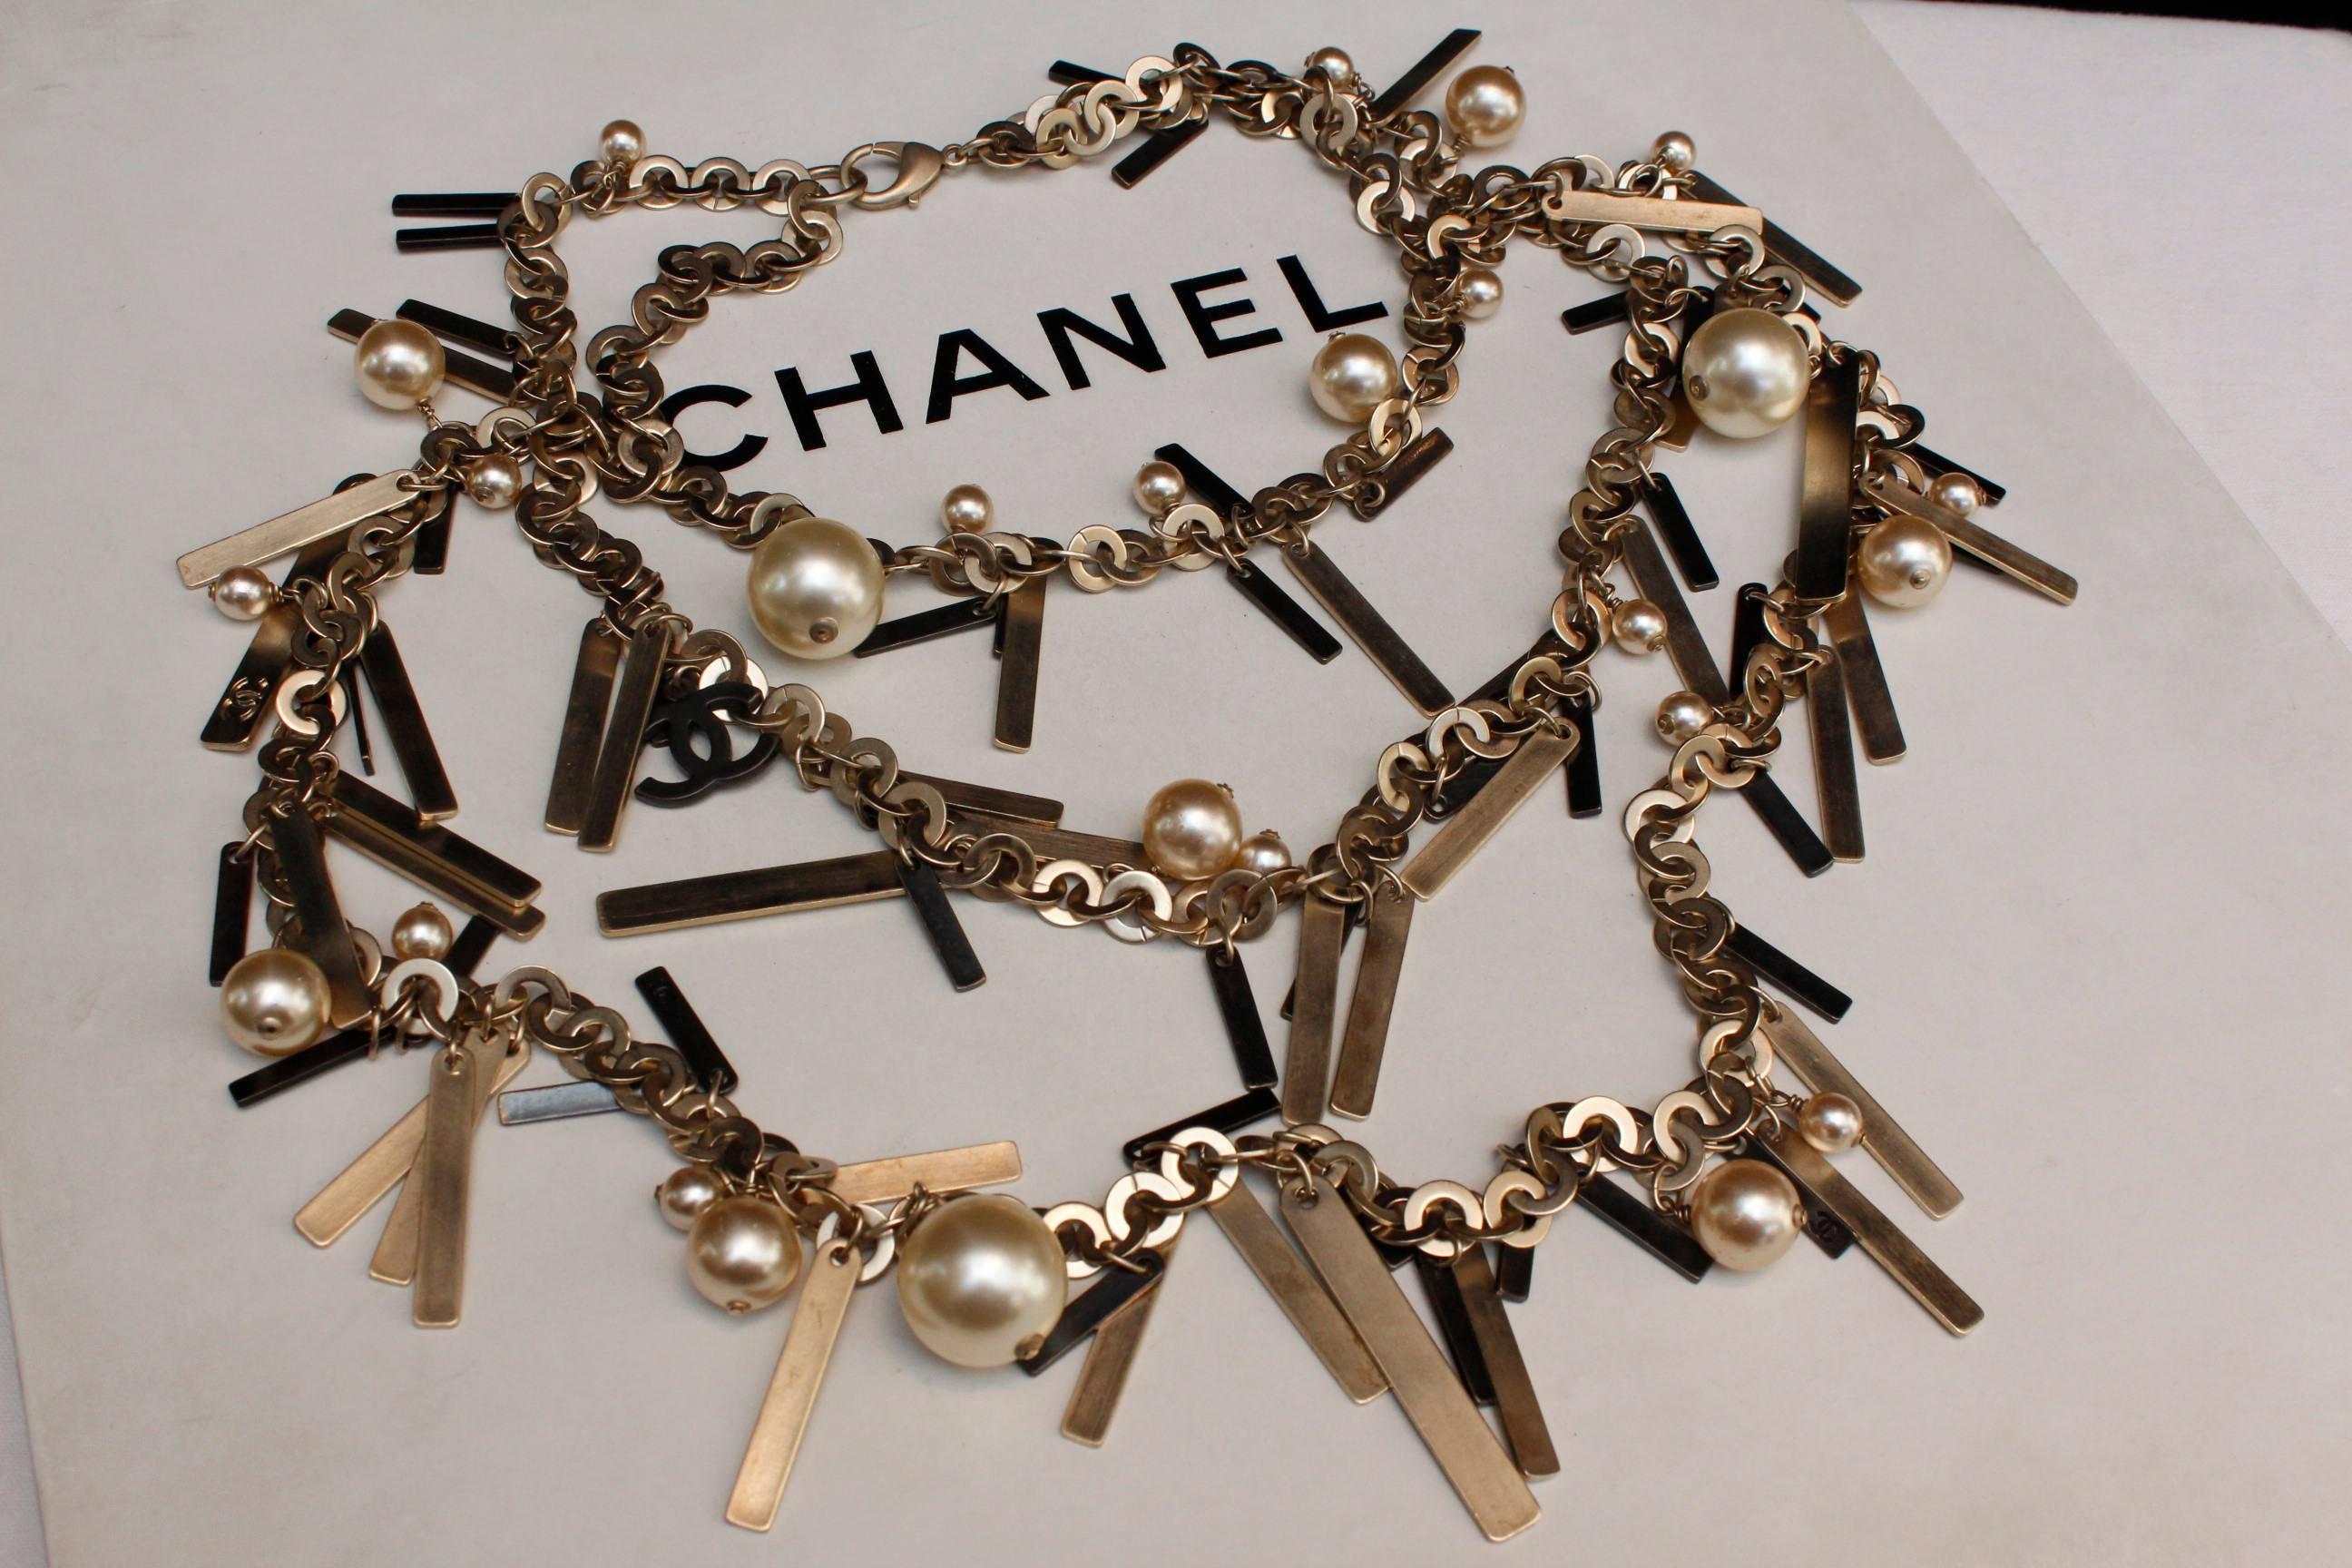 CHANEL (Made in France) Three strand necklace composed of silver/gold rings decorated with multiple blackened silver plate and golden thin strips as well as pearly beads and some blackened CC logo pendants.

2003 Spring Collection, as indicated on